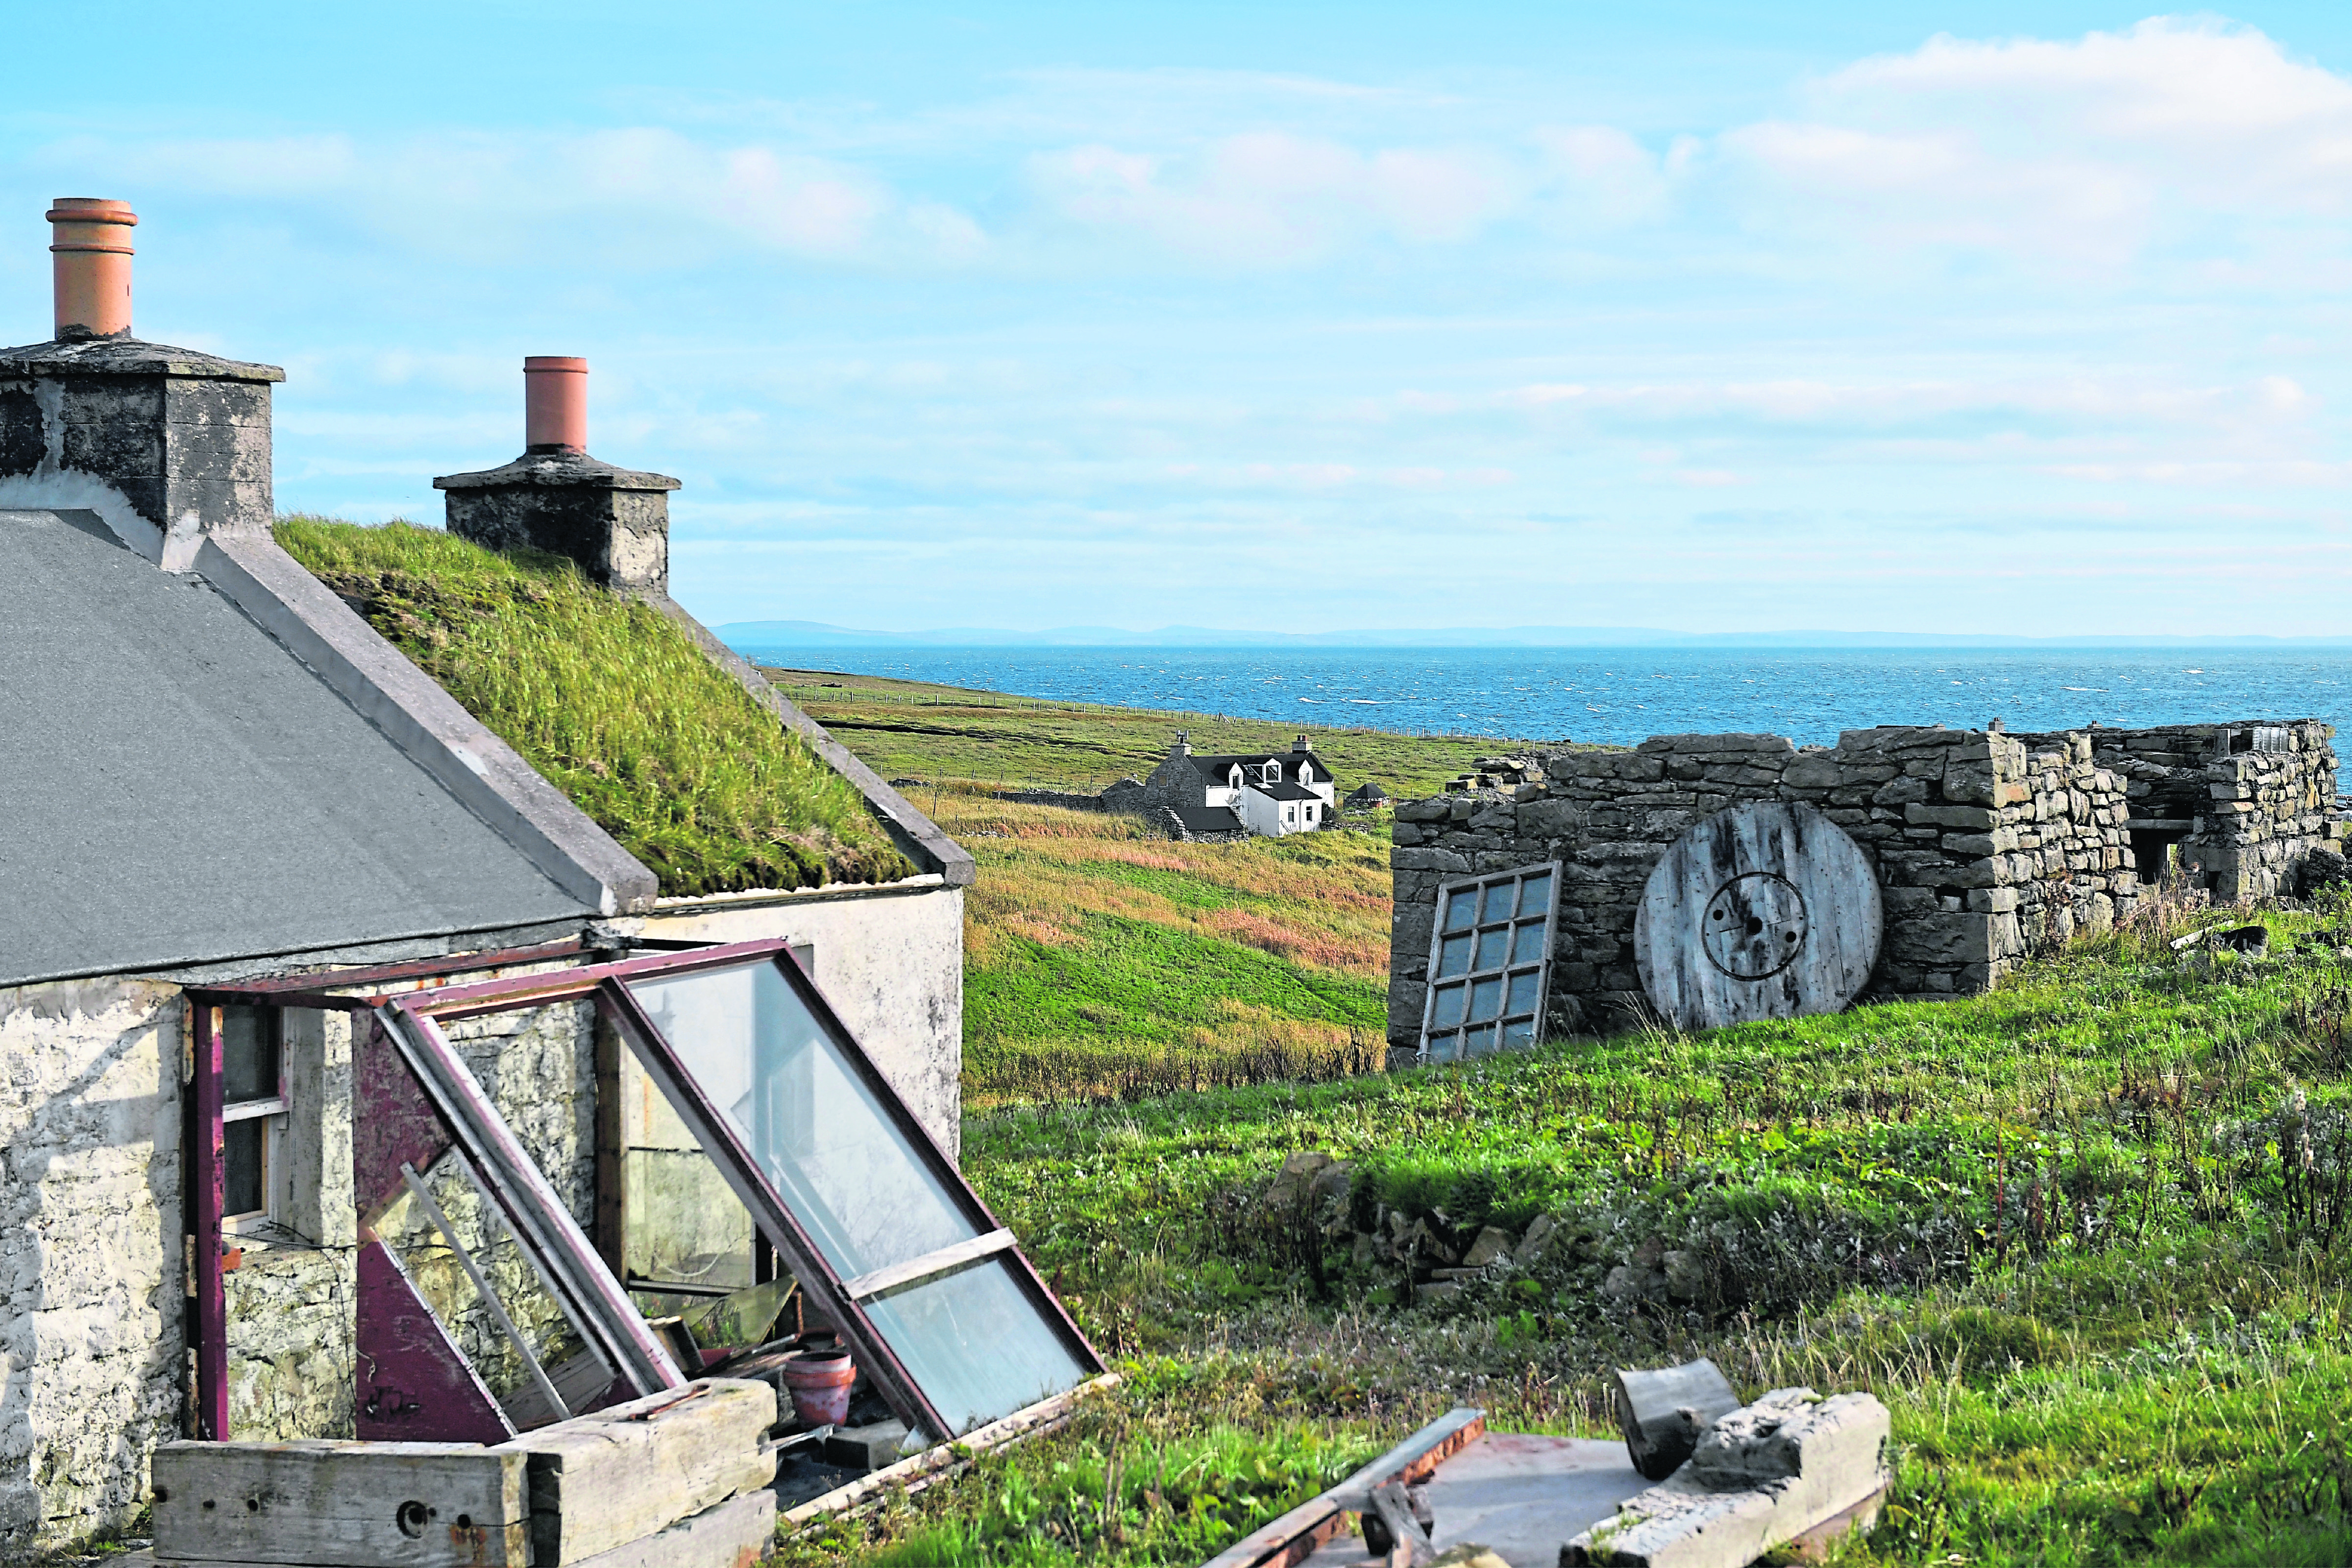 FOULA, SCOTLAND - OCTOBER 03:  A view of a property on the Island of Foula on October 3, 2016 in Foula, Scotland.Foula is the remotest inhabited island in Great Britain with a current population of thirty people,and has been owned since the turn of the 20th century by the Holbourn family.  (Photo by Jeff J Mitchell/Getty Images)